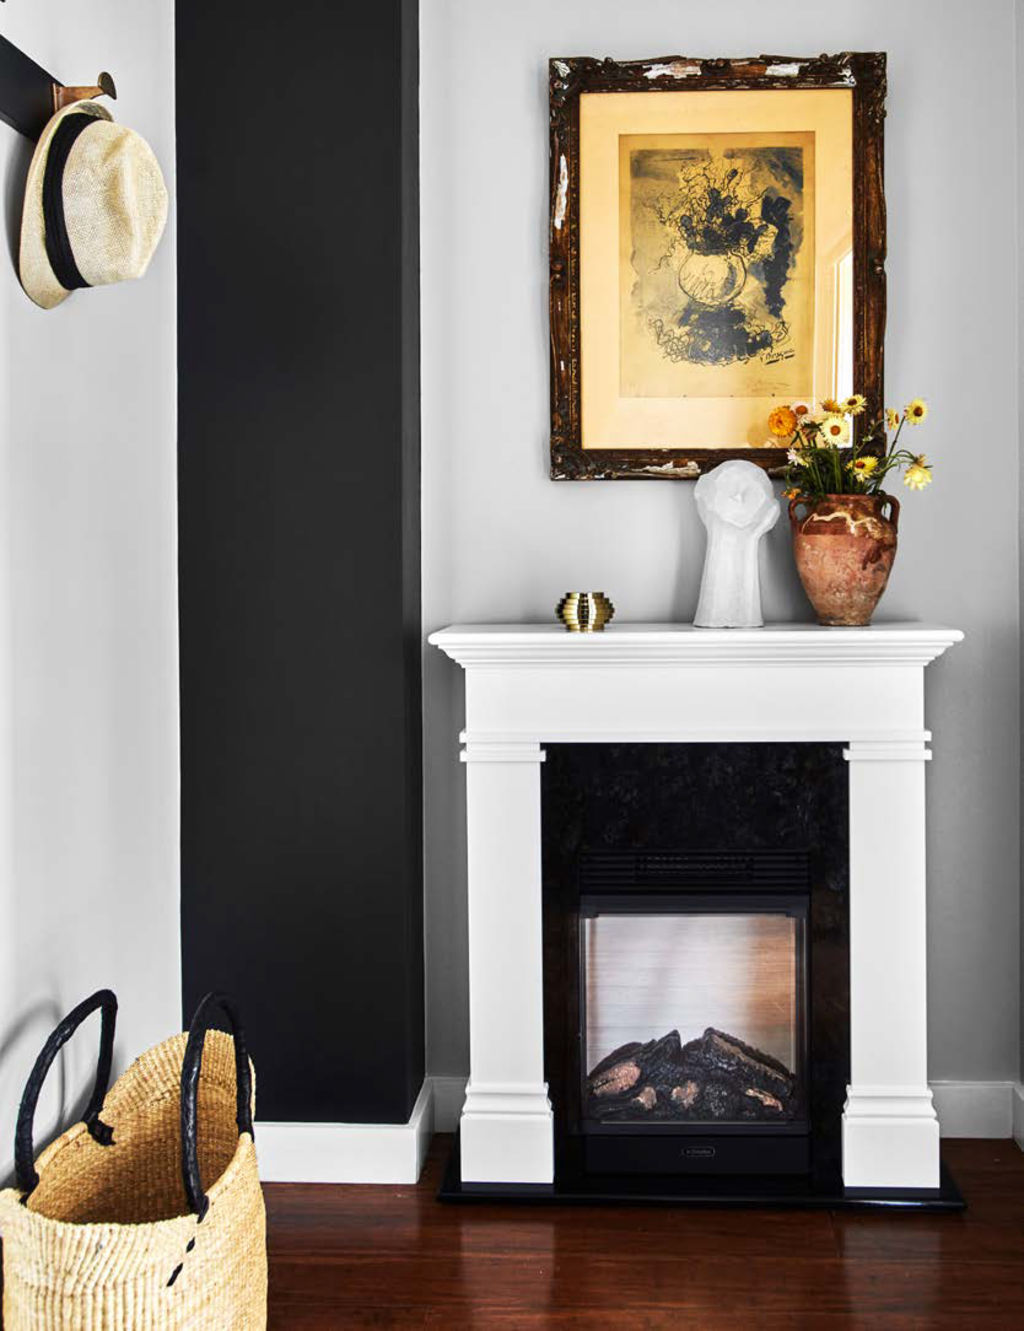 You can have that cosy fire feel, even in a rental, designer Lynne Bradley says. Photo: Will Horner